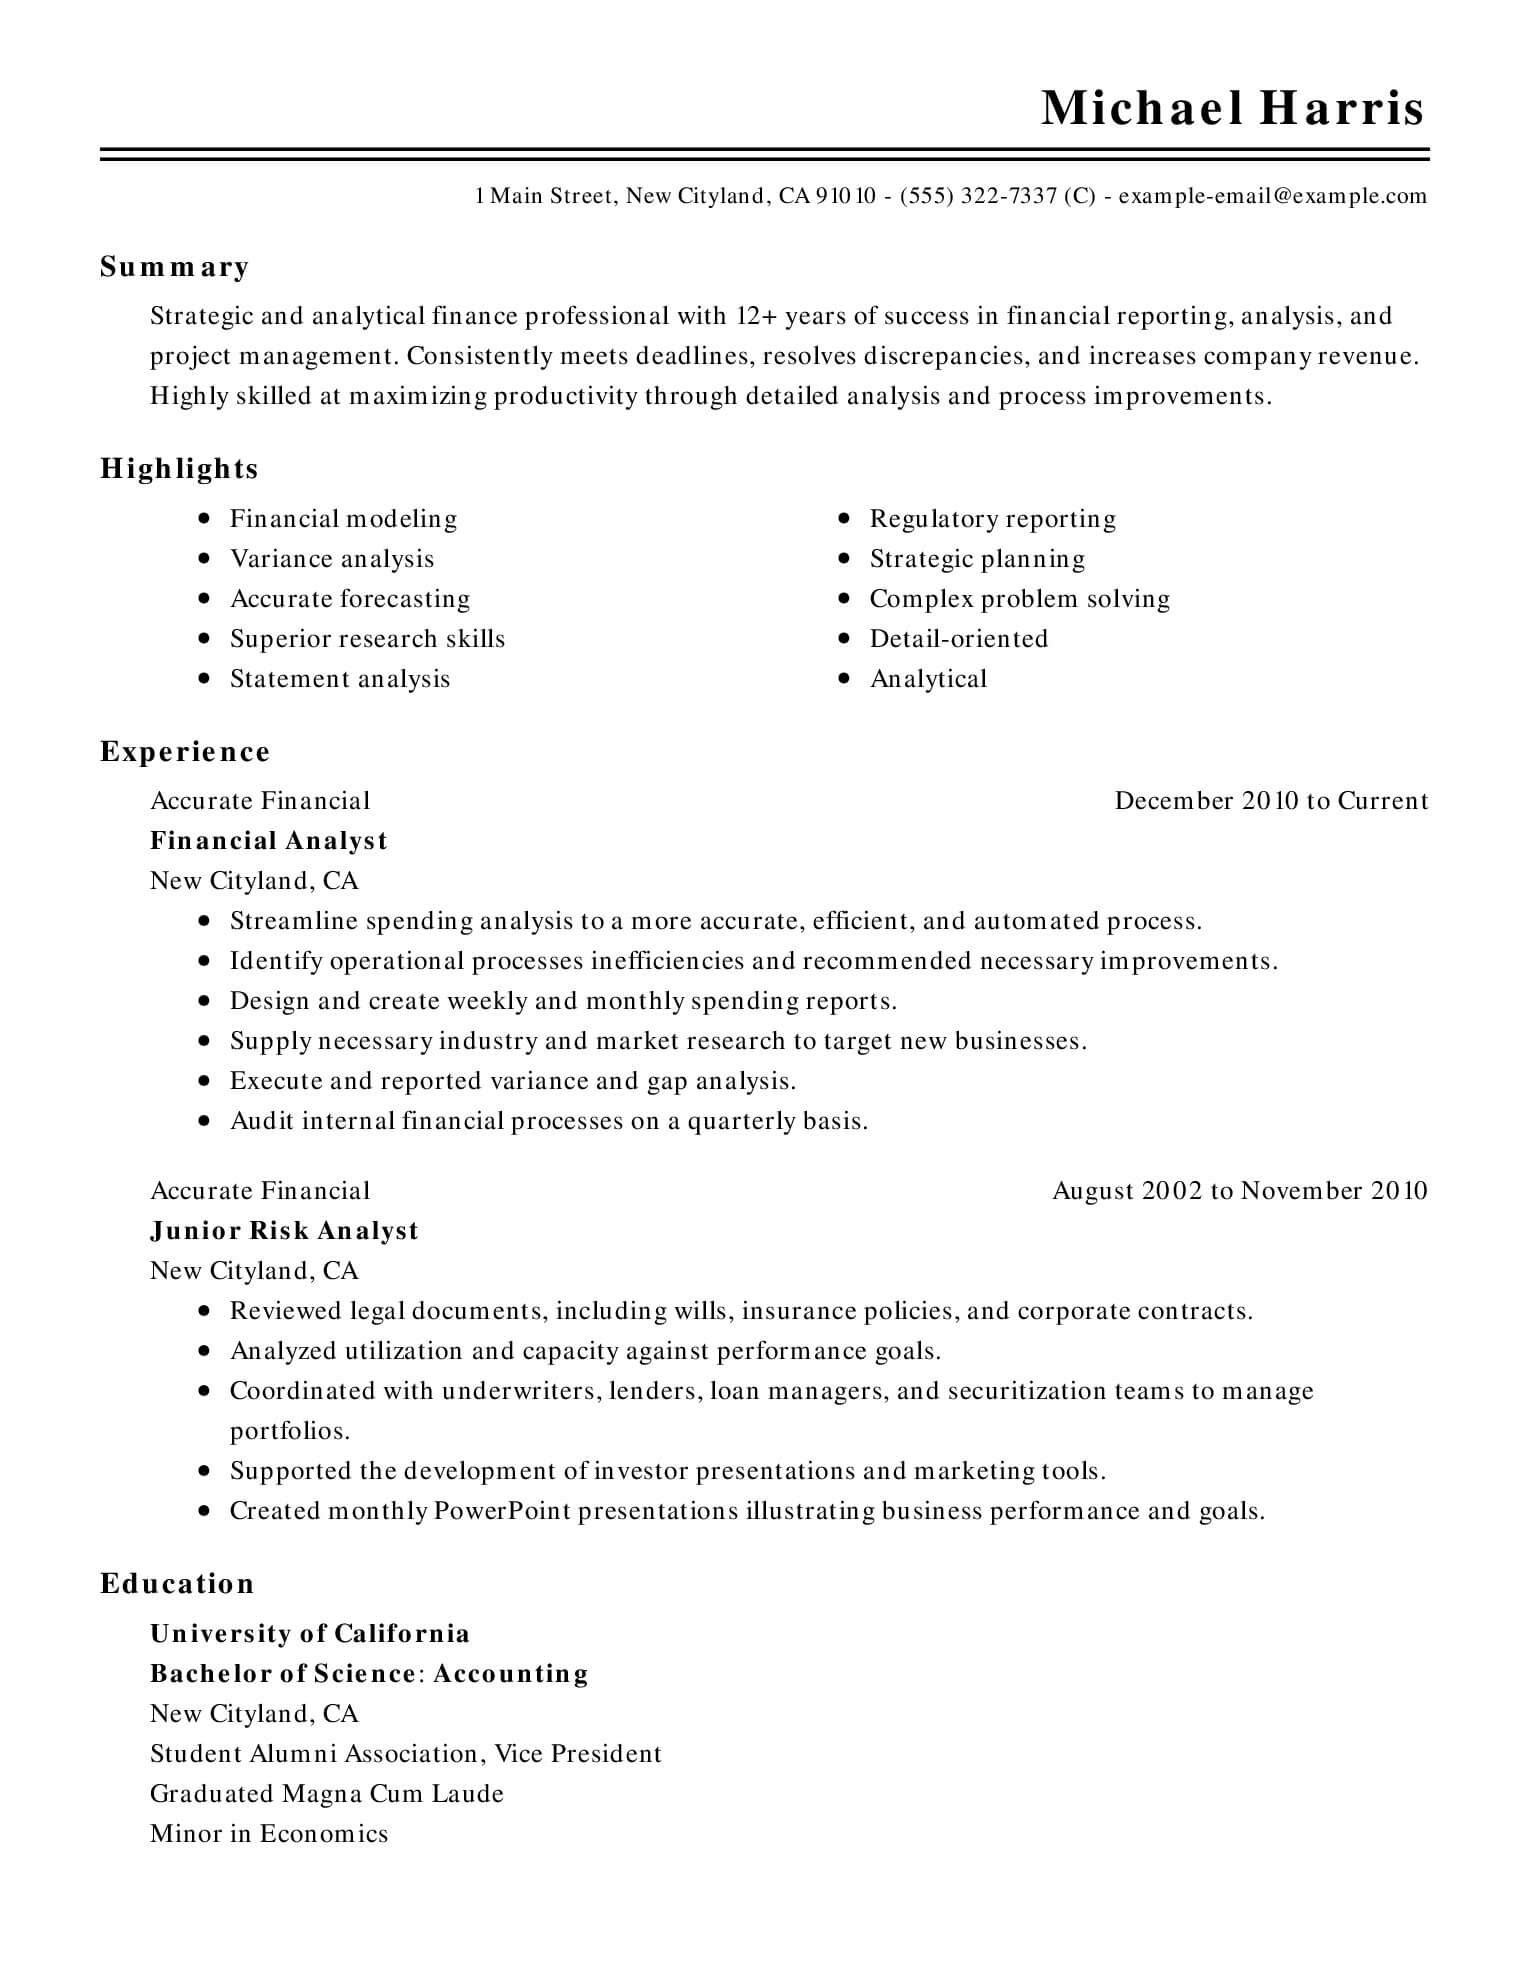 Basic Resume Template For Microsoft Word | Livecareer Pertaining To Simple Resume Template Microsoft Word